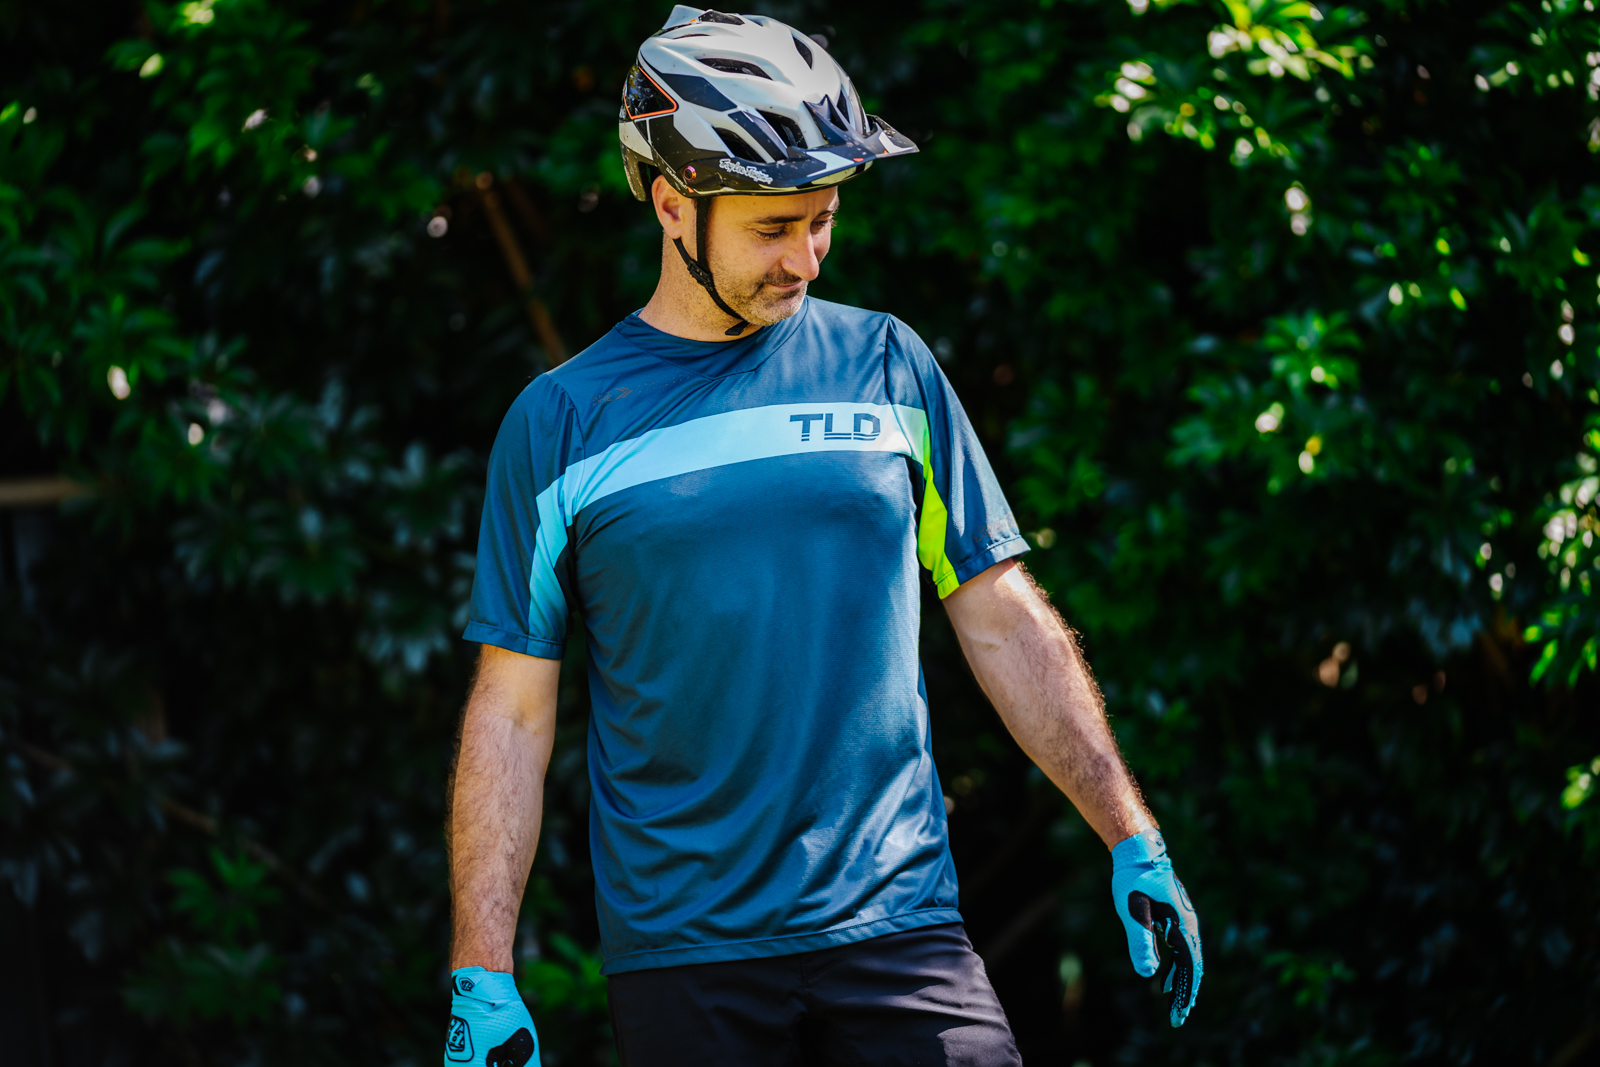 MTB jersey TLD SKYLINE AIR FADES lightweight with short sleeves